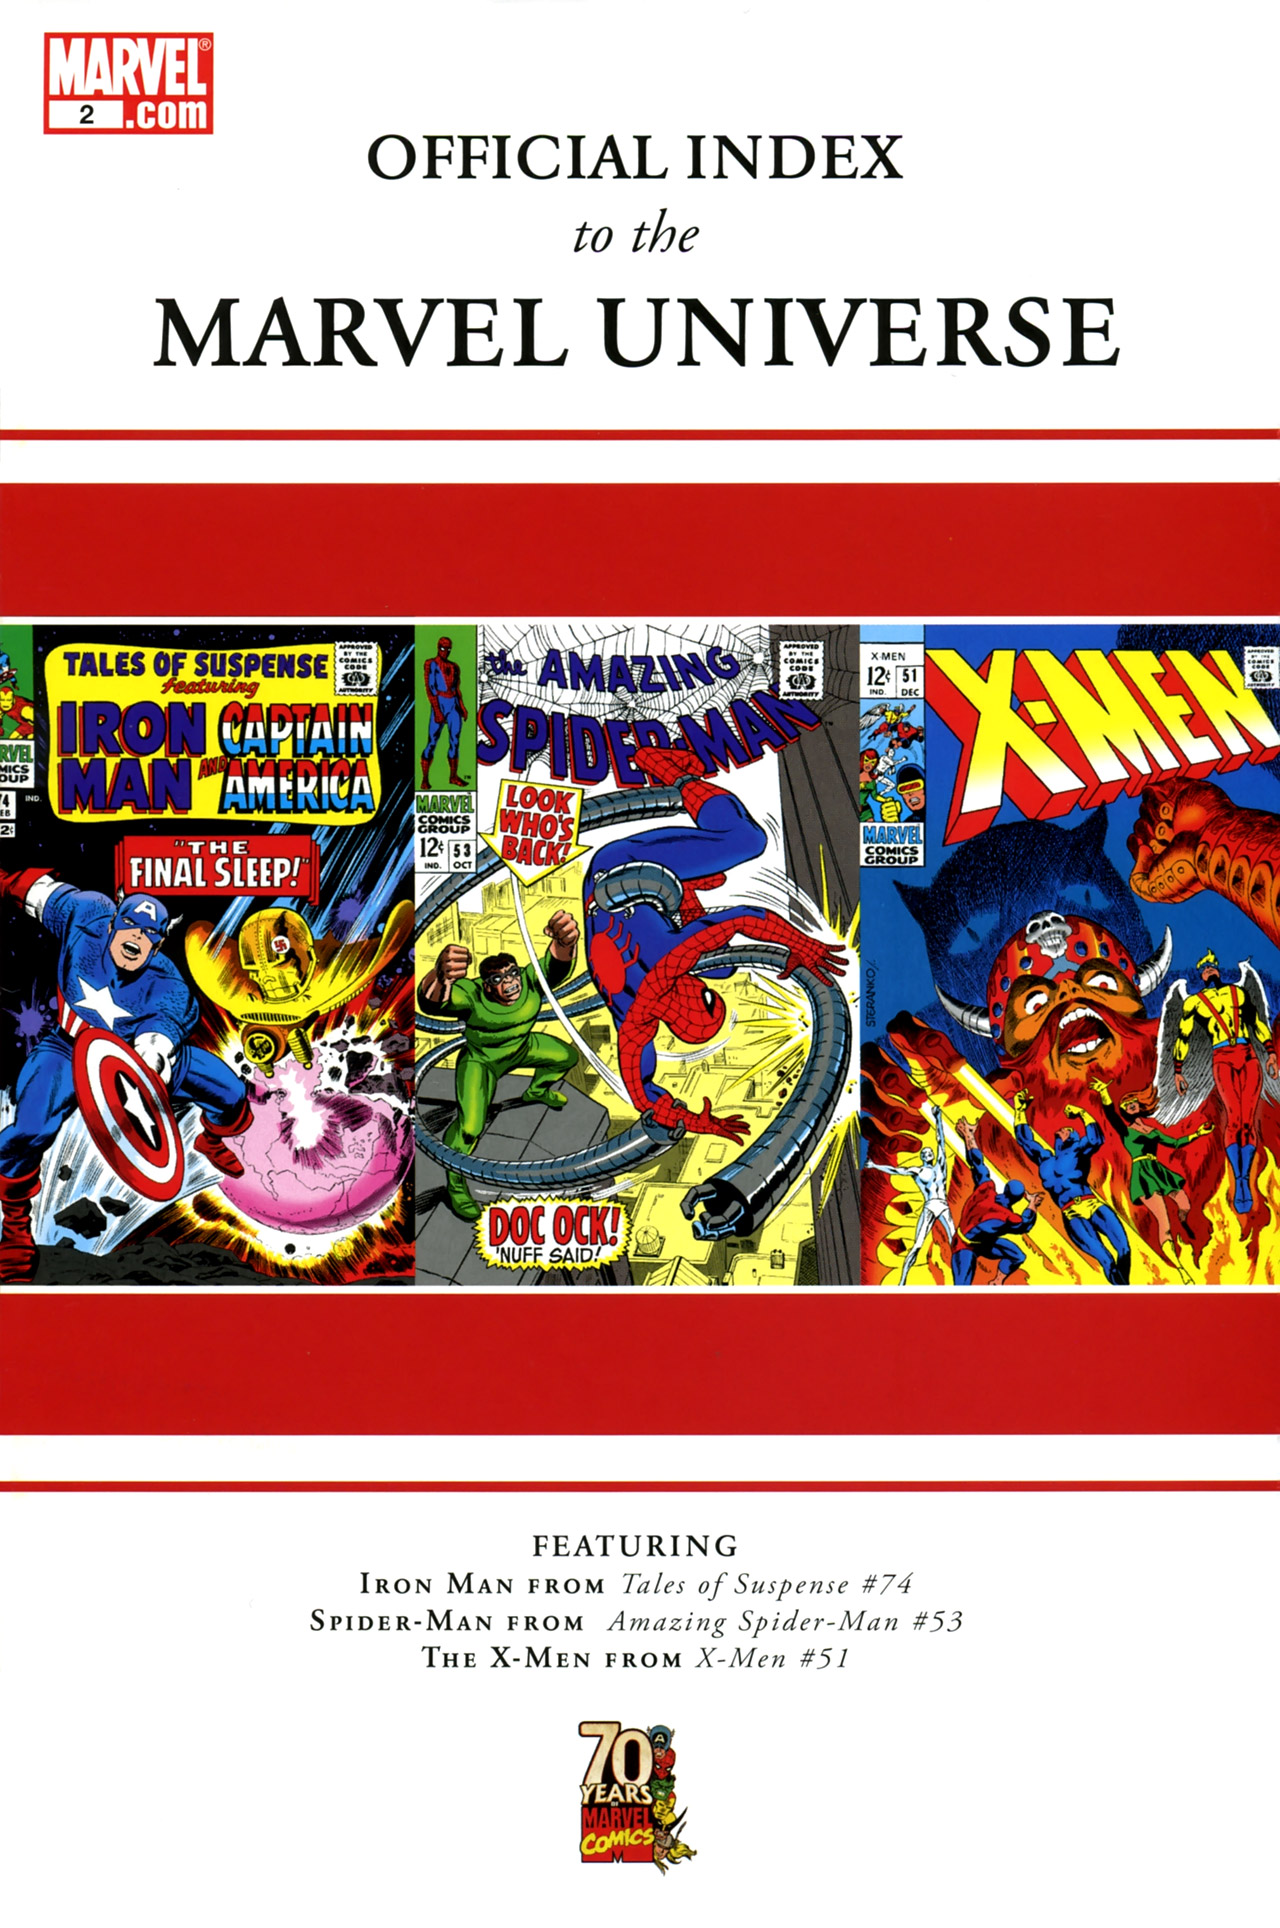 Read online Official Index to the Marvel Universe comic -  Issue #2 - 1